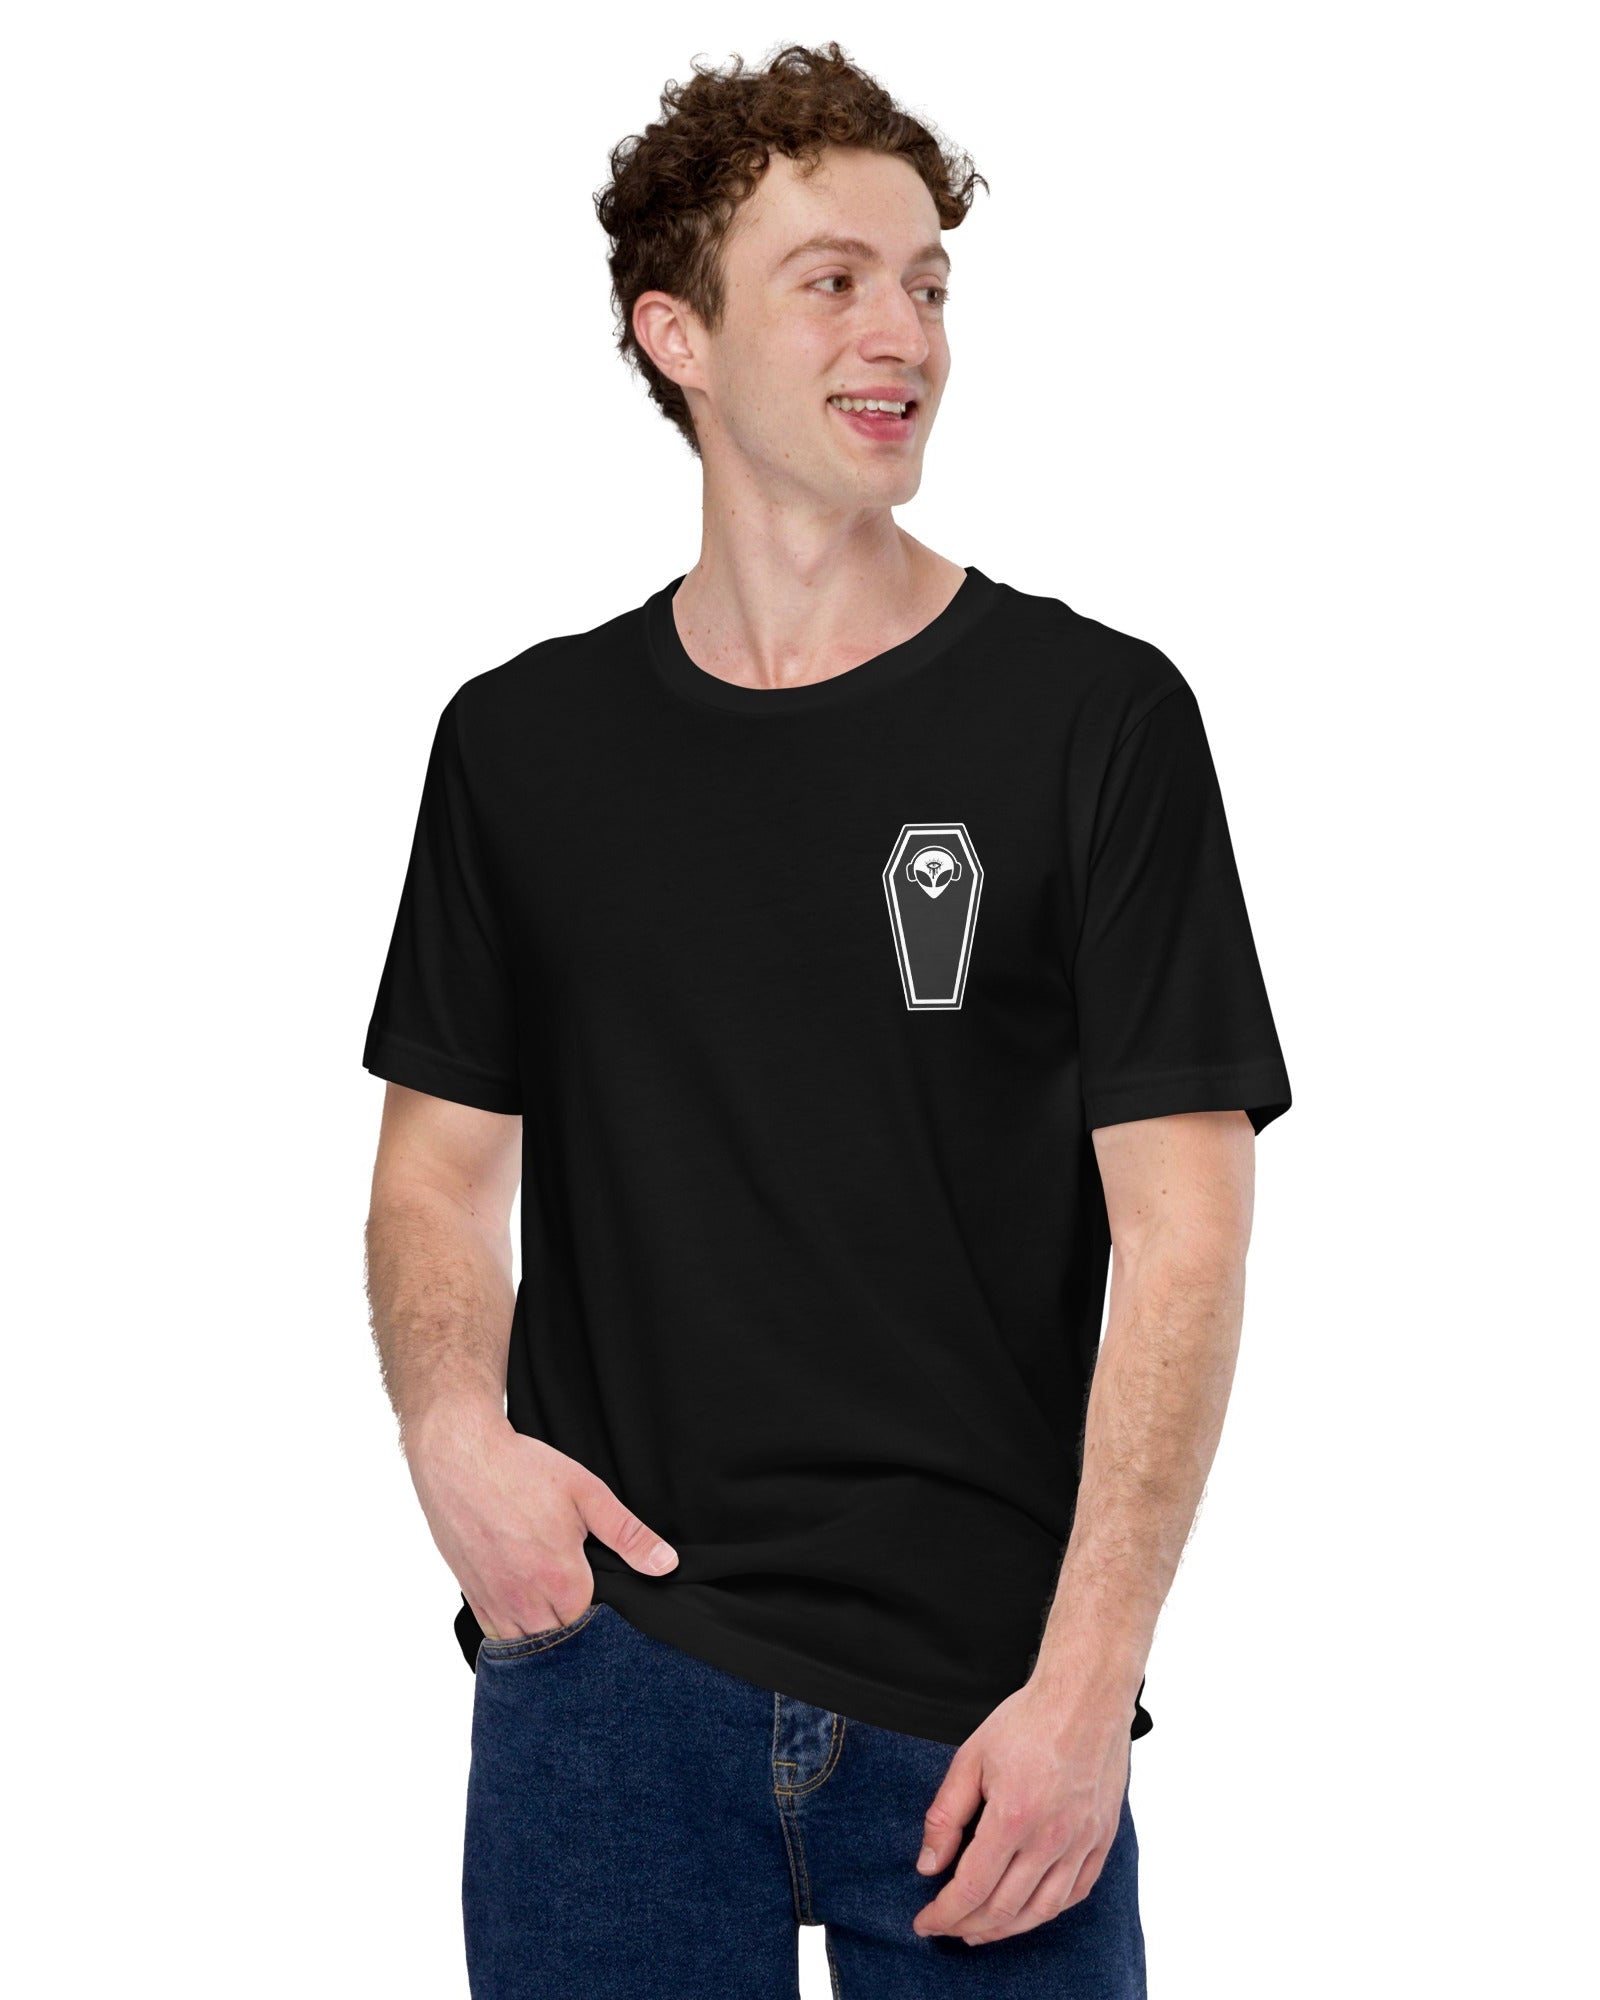 The front side of the model wearing a black t-shirt with an alien head in a coffin over the left chest.